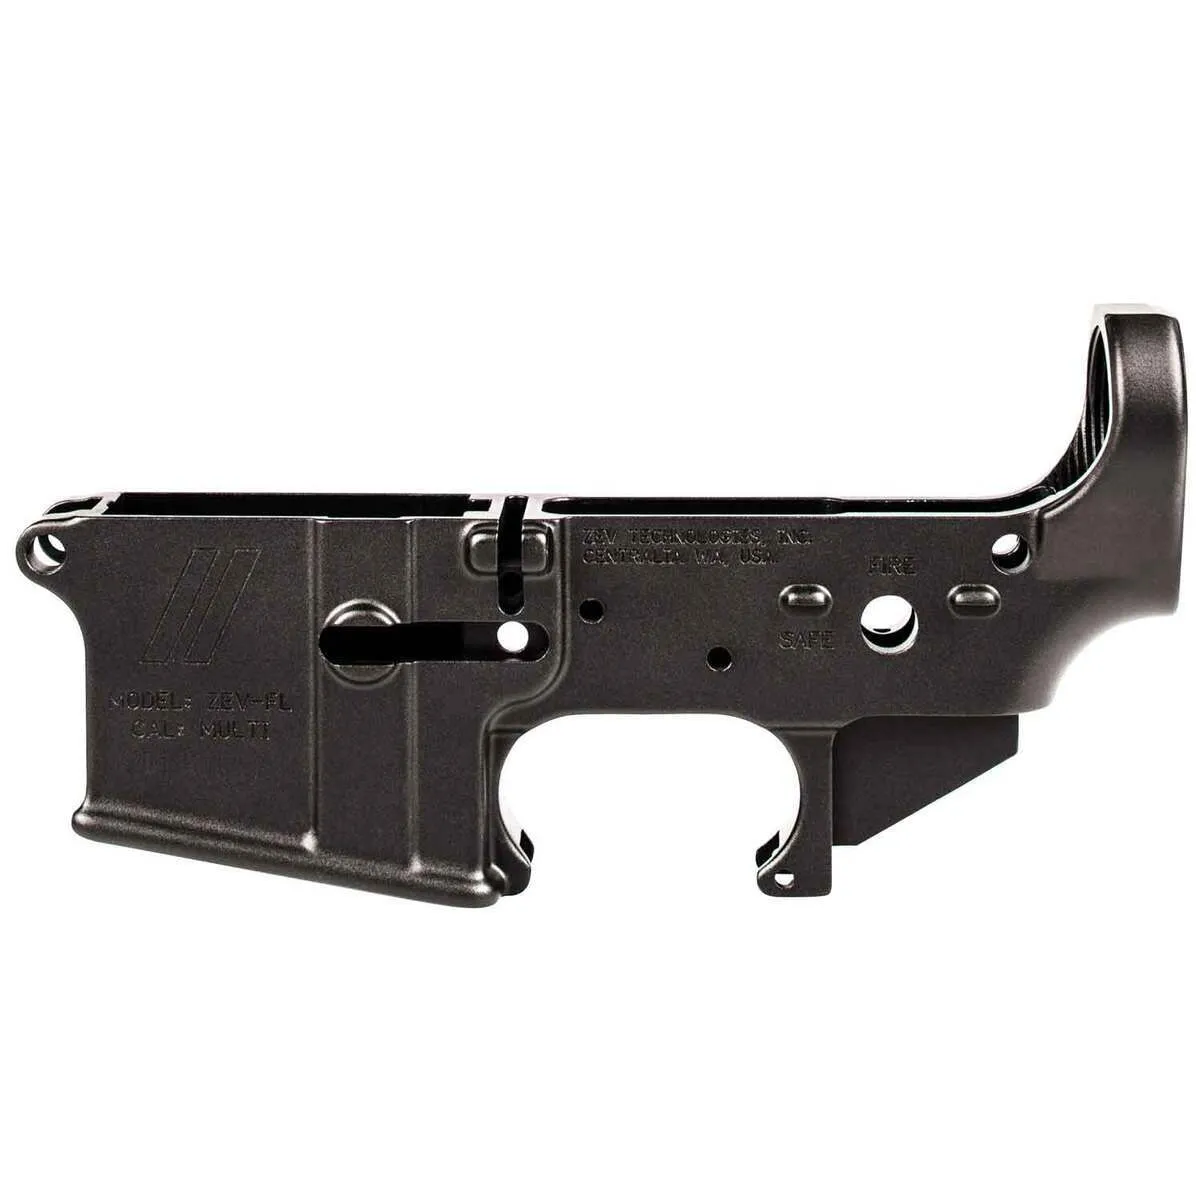 Zev Technologies AR-15 Forged Lower